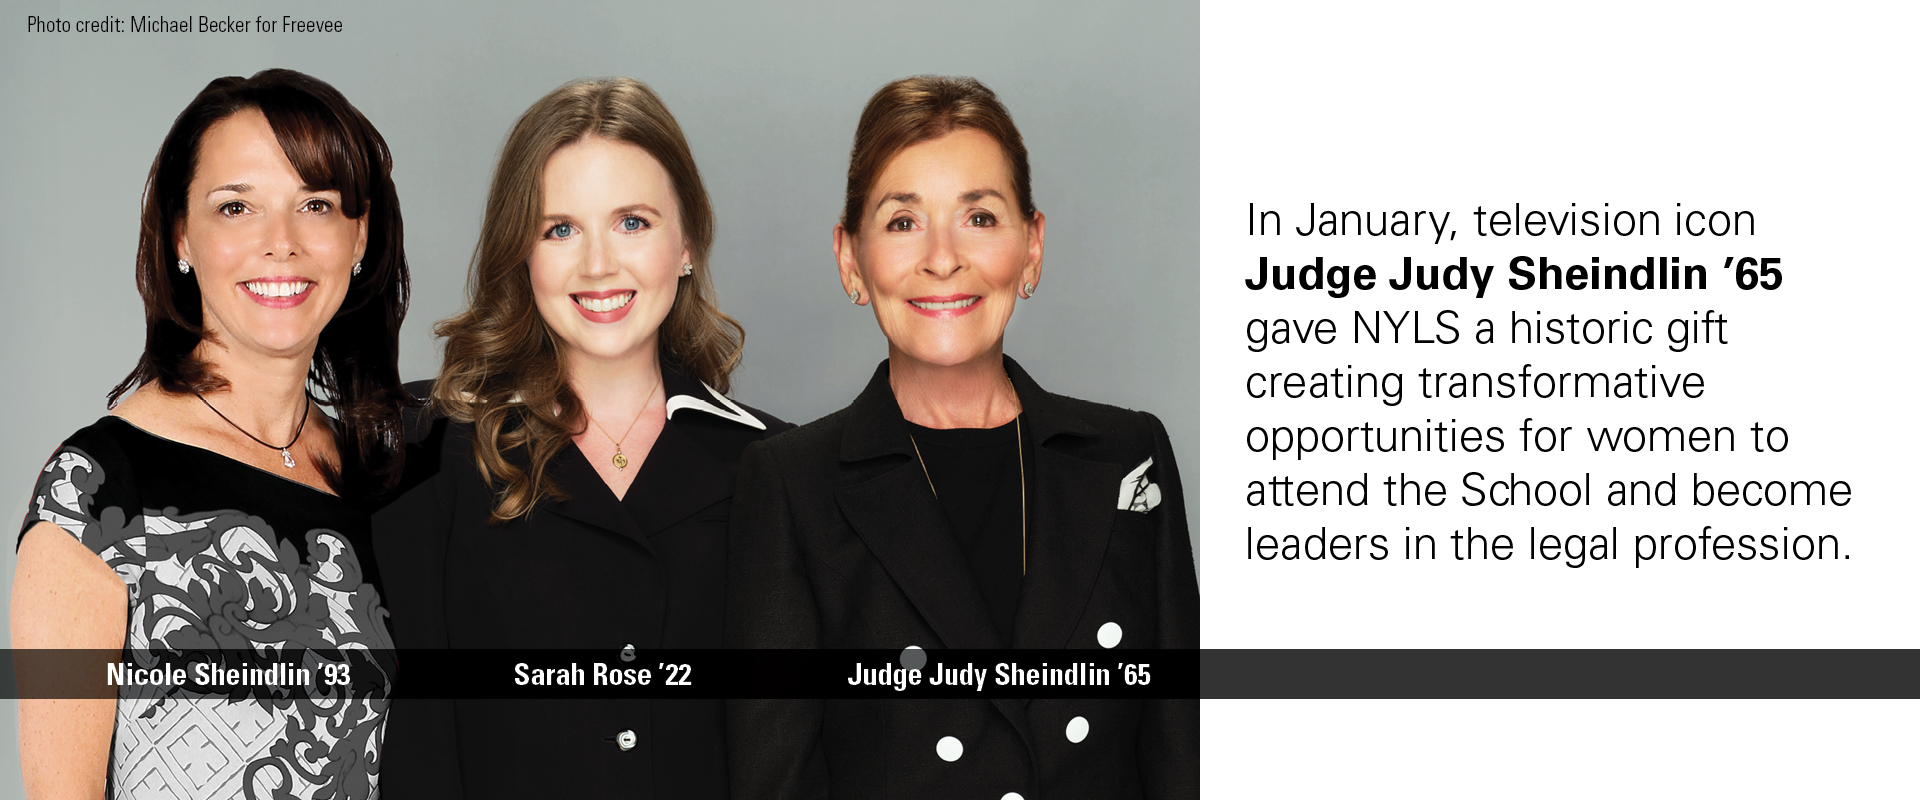 In January, television icon Judge Judy Sheindlin ’65 gave NYLS a historic gift creating transformative opportunities for women to attend the School and become leaders in the legal profession.